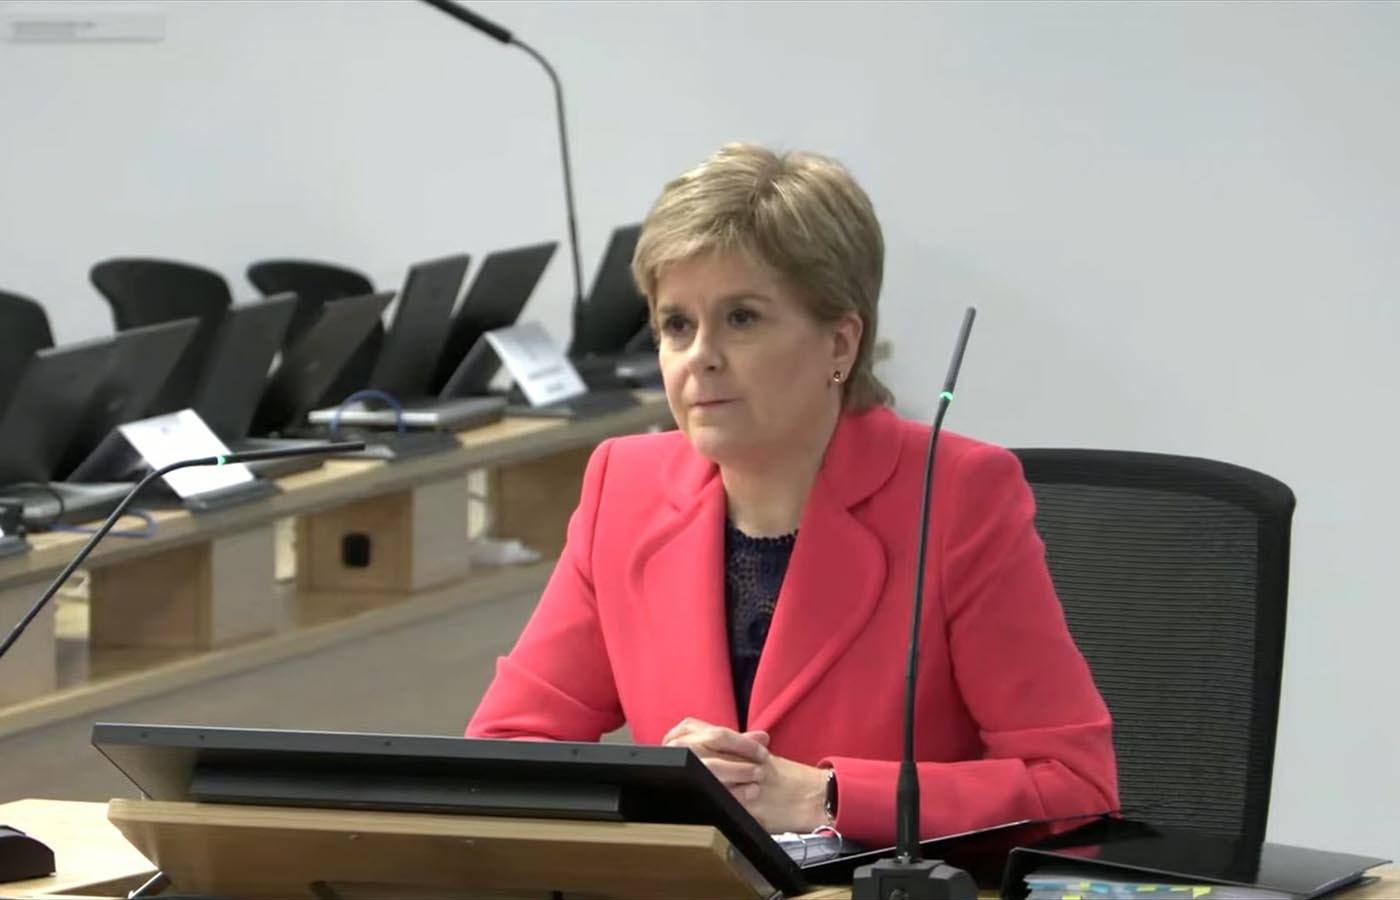 Nicola Sturgeon said the Scottish Government was 'open, transparent and accountable' throughout its pandemic response.